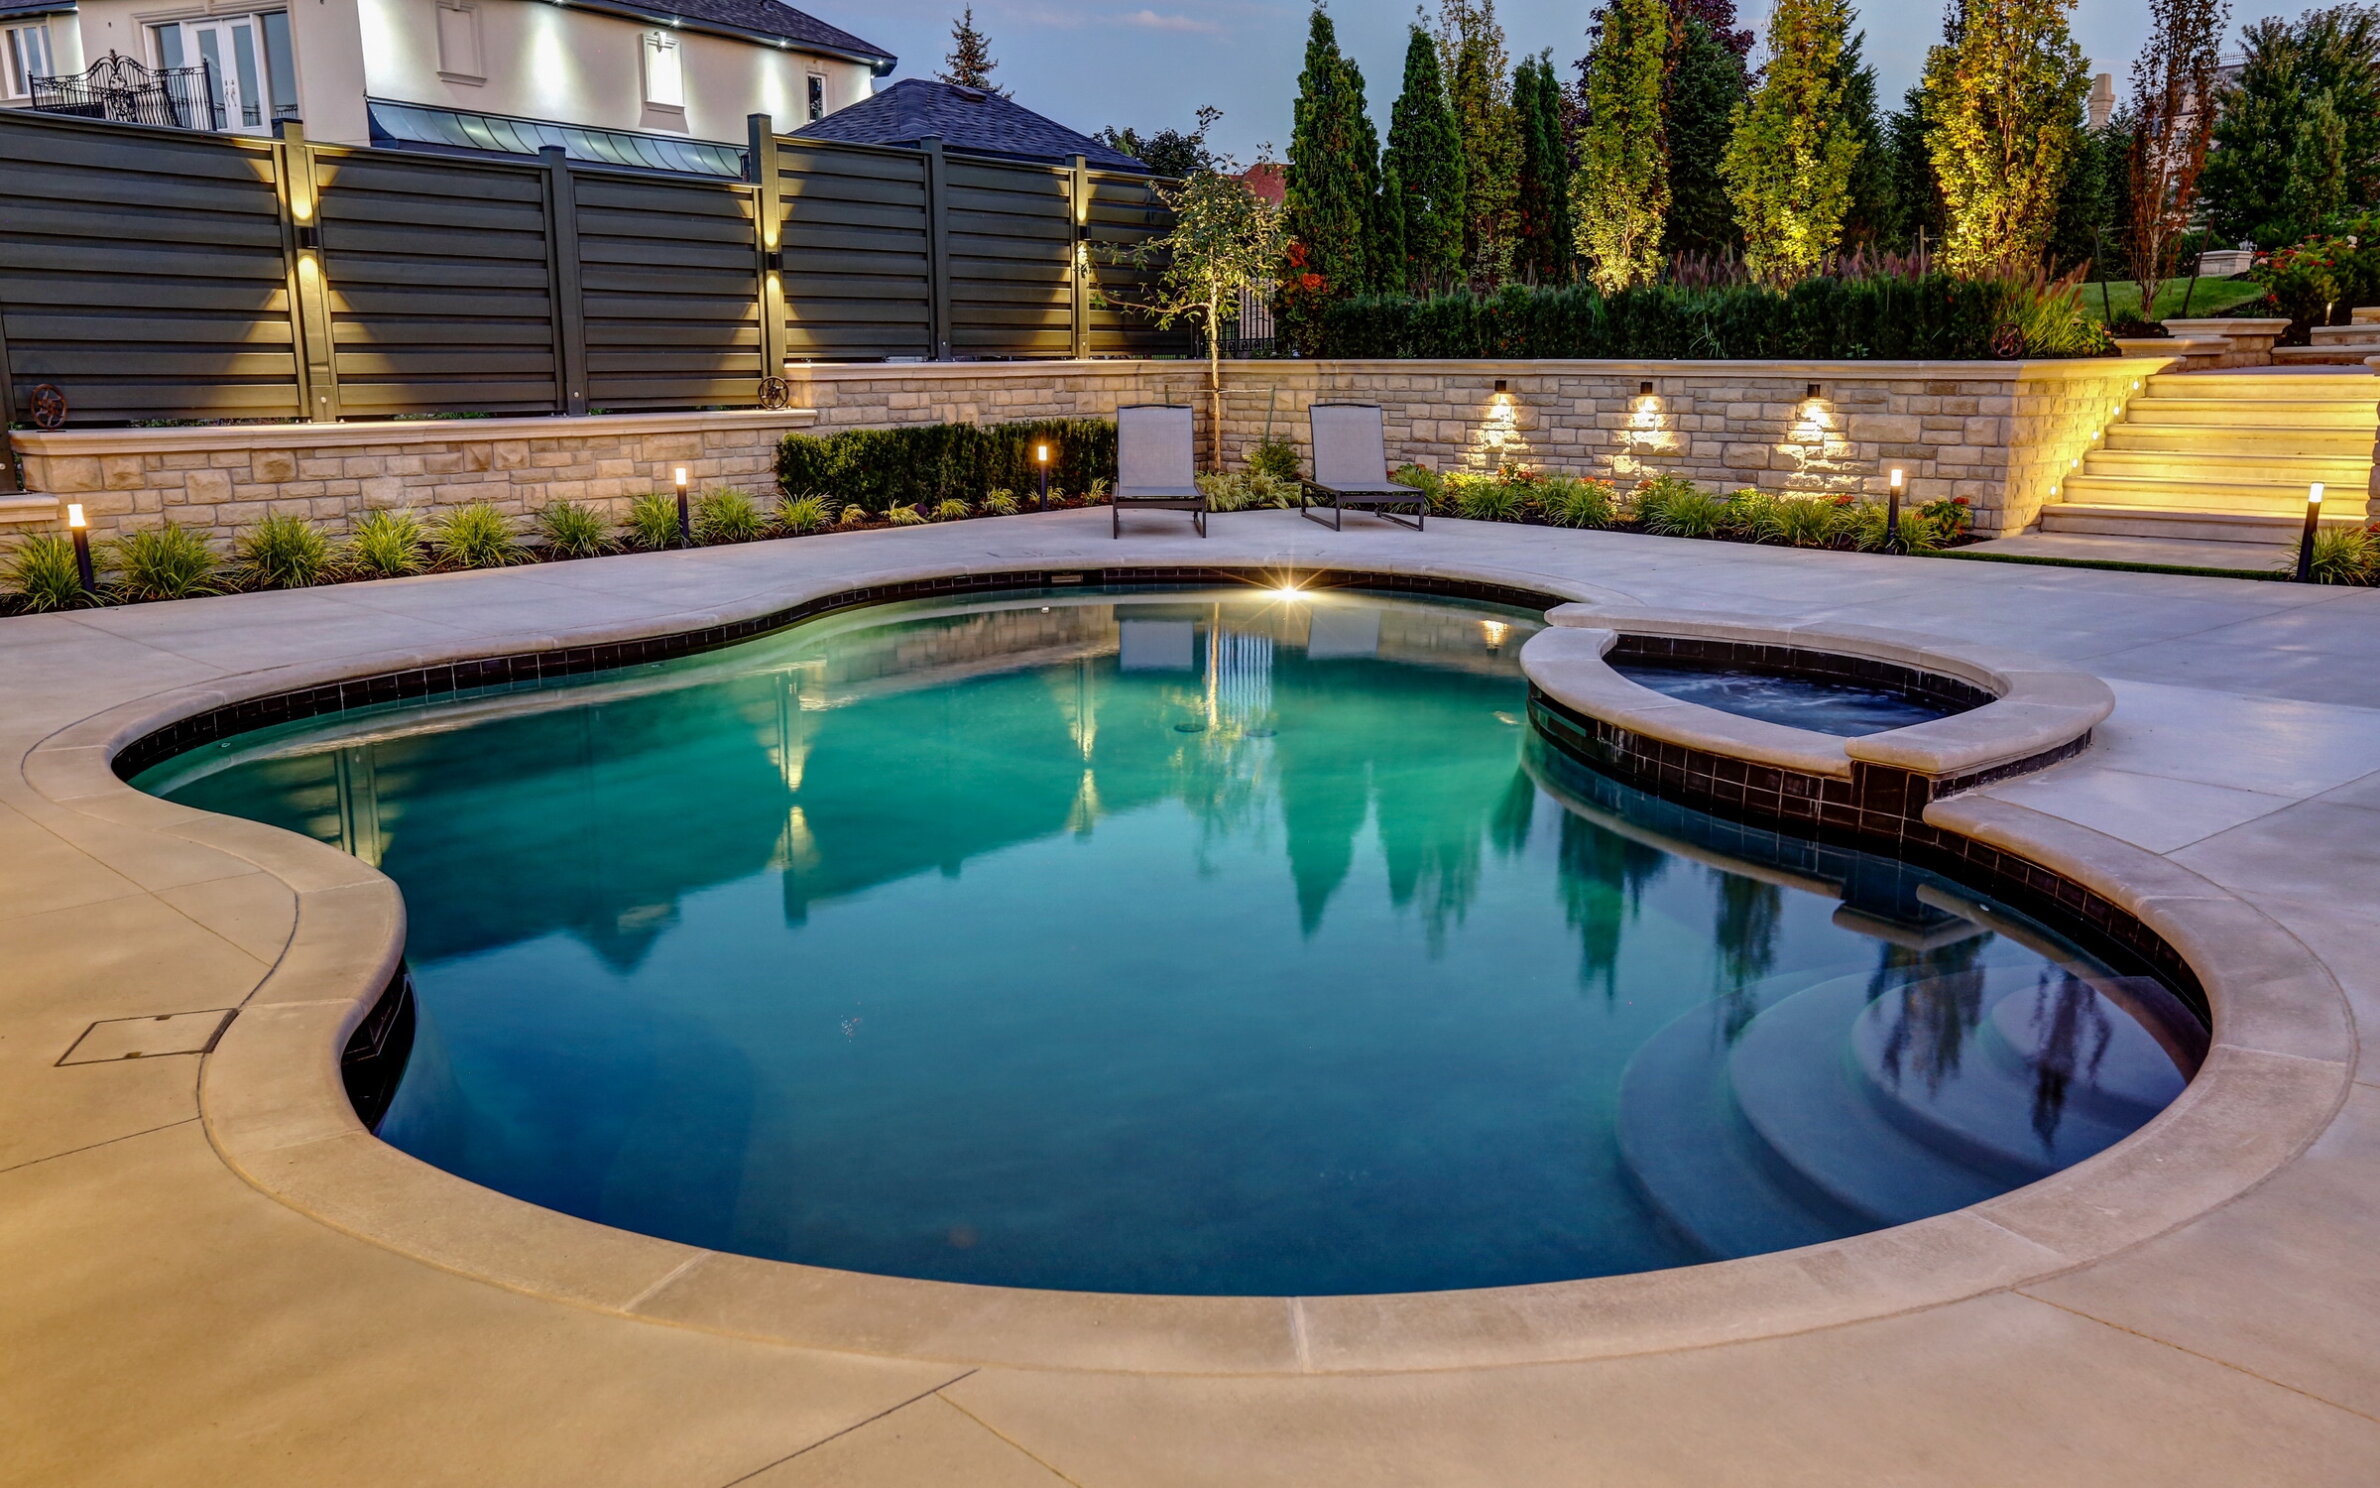 An outdoor swimming pool with an integrated hot tub, surrounded by stone landscaping, loungers, and garden lights, reflecting the evening sky.